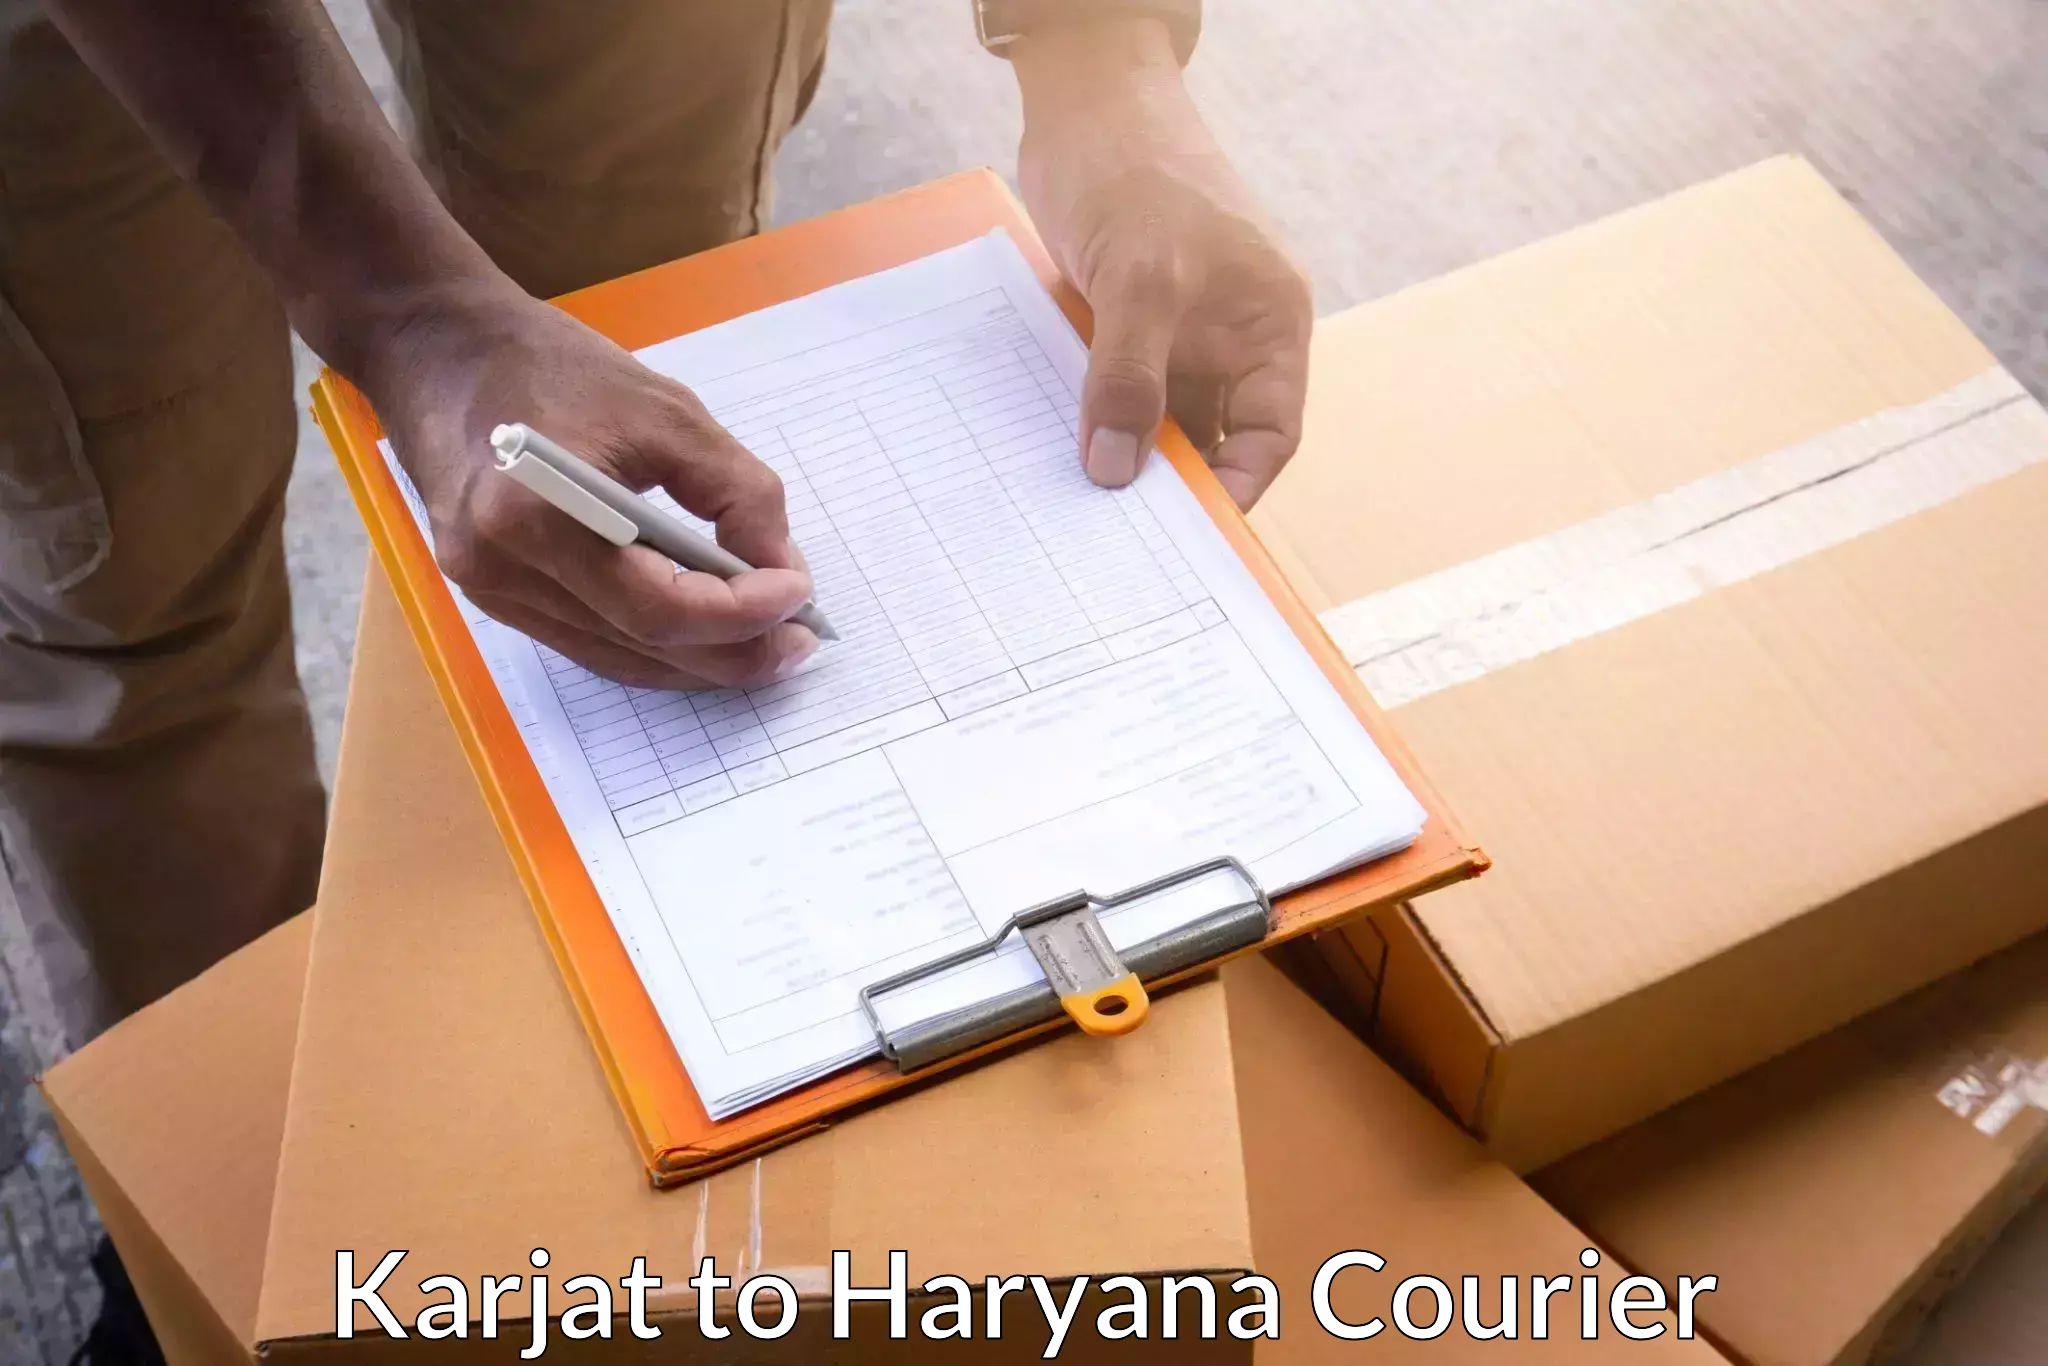 Secure package delivery Karjat to Gurgaon